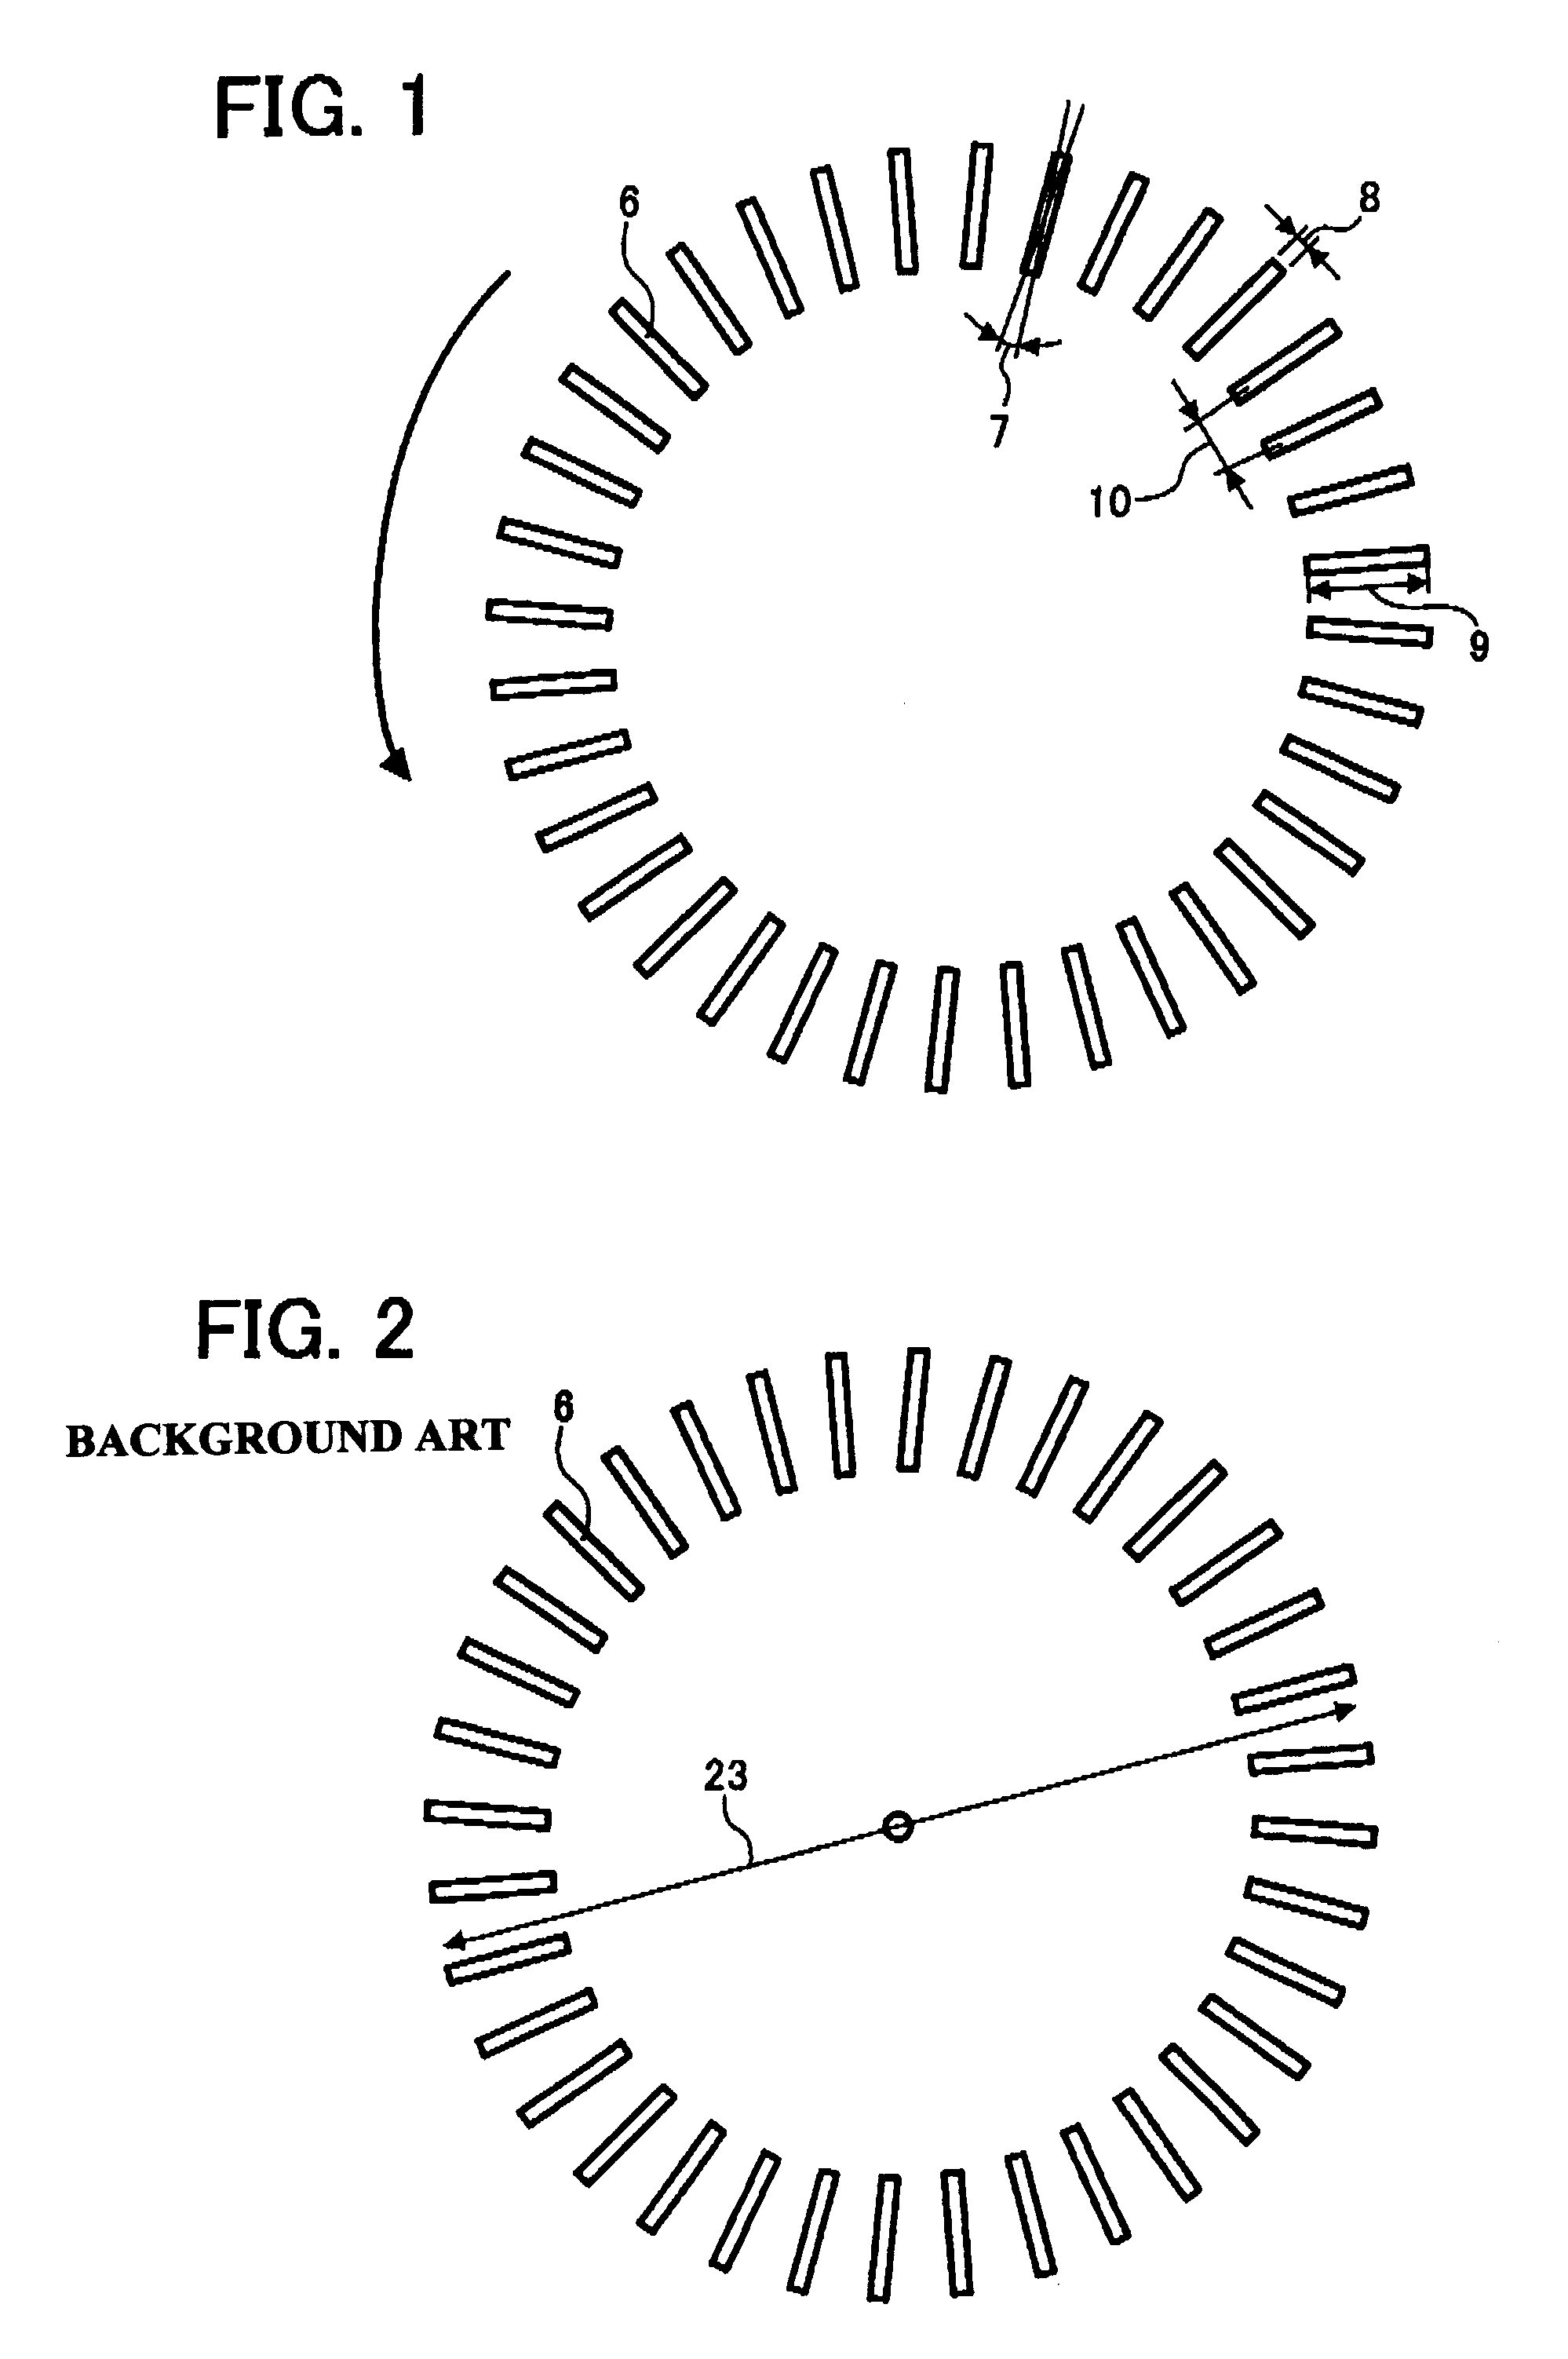 Pulverizing apparatus and method for pulverizing